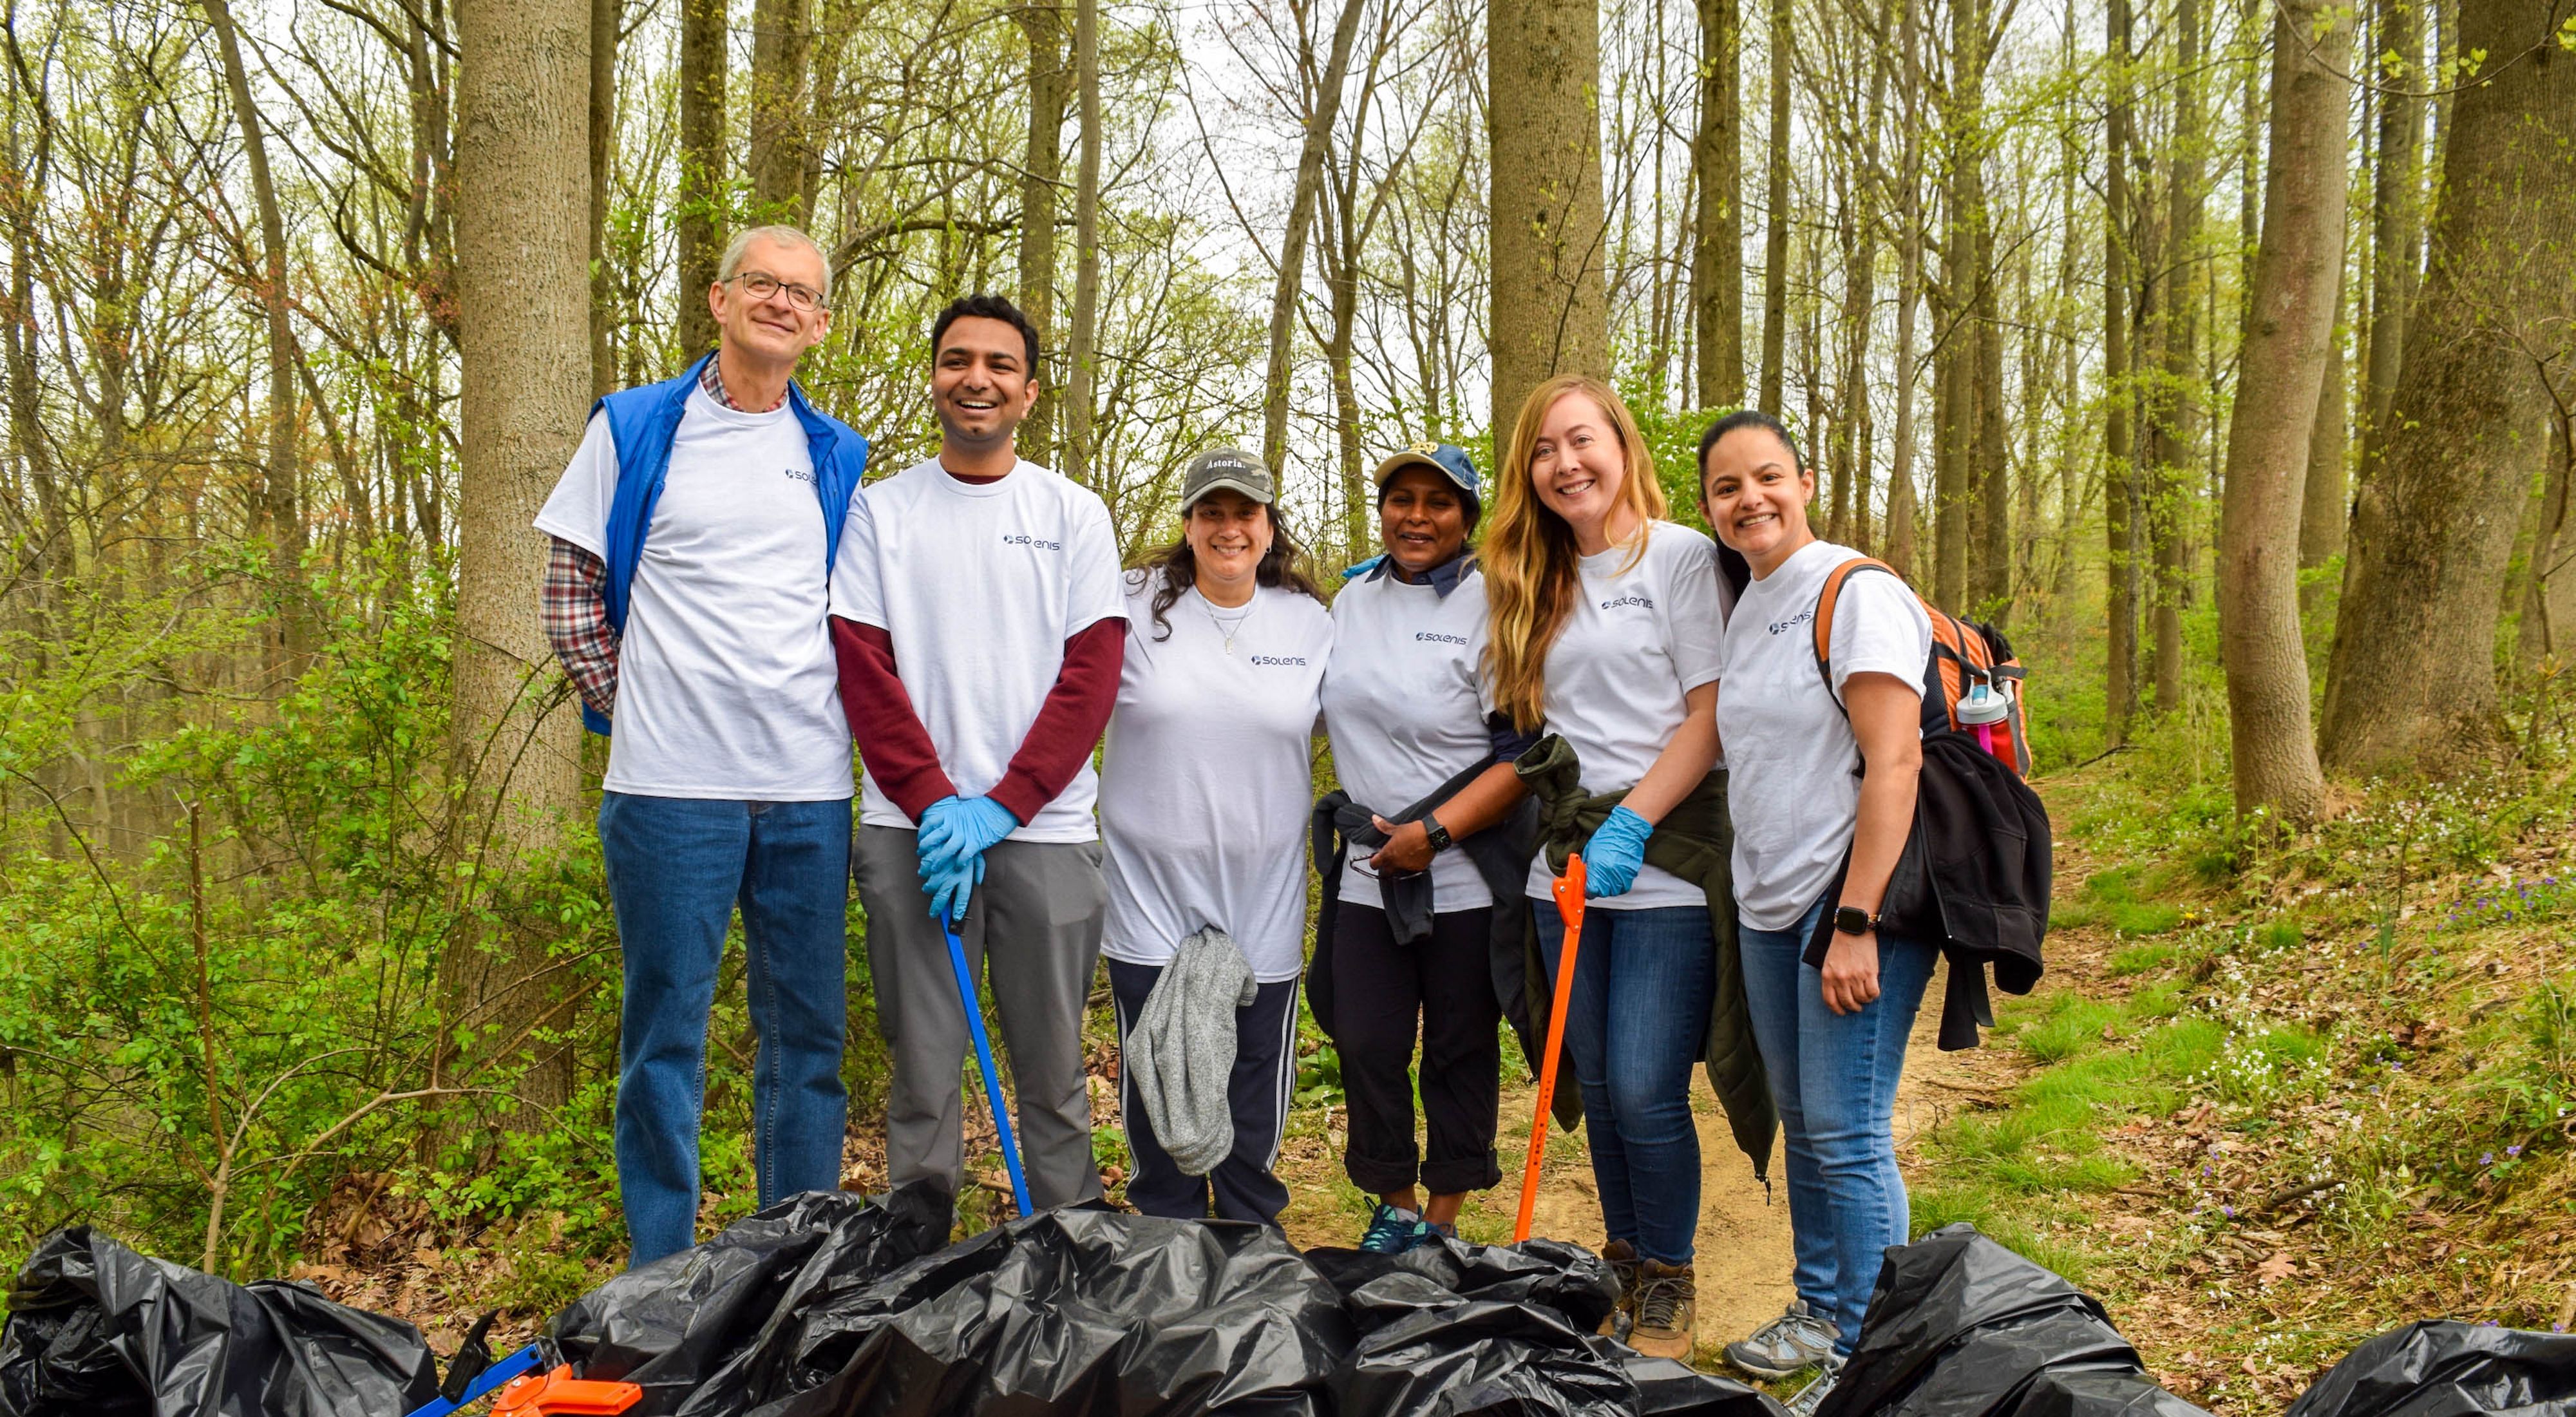 Six people pose together during a stream cleanup event. They are holding large black plastic trash bags and carrying long orange grabbers.